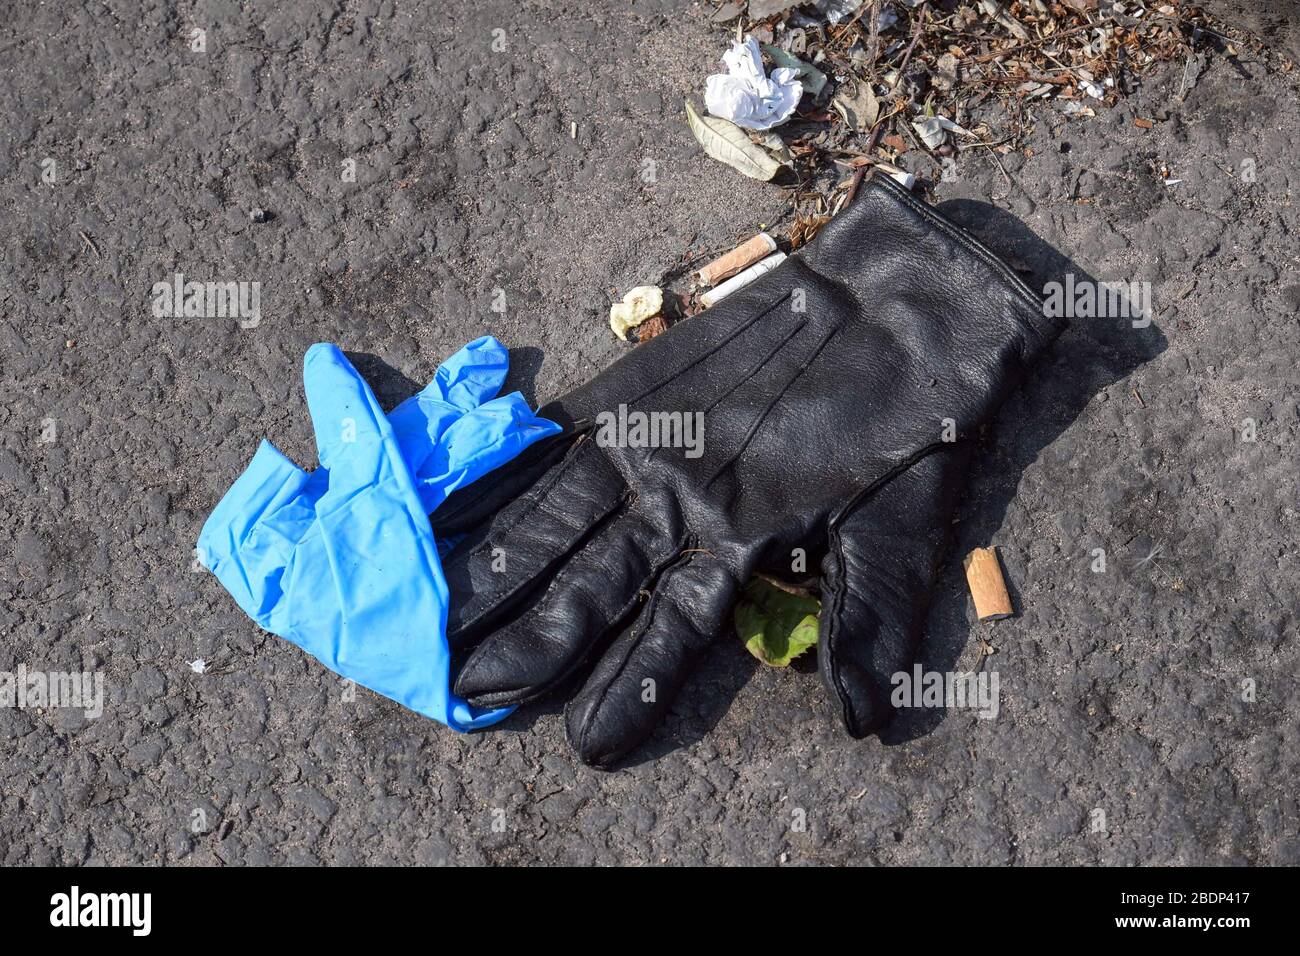 Birmingham, West Midlands, UK. 9th Apr, 2020. Although coronavirus is an invisible threat to the human eye, a more visible blight on the country are discarded gloves and face masks. Pictures show used gloves and masks, which may be contaminated, strewn on the floor in Birmingham's city centre. Credit: Sam Holiday/Alamy Live News Stock Photo